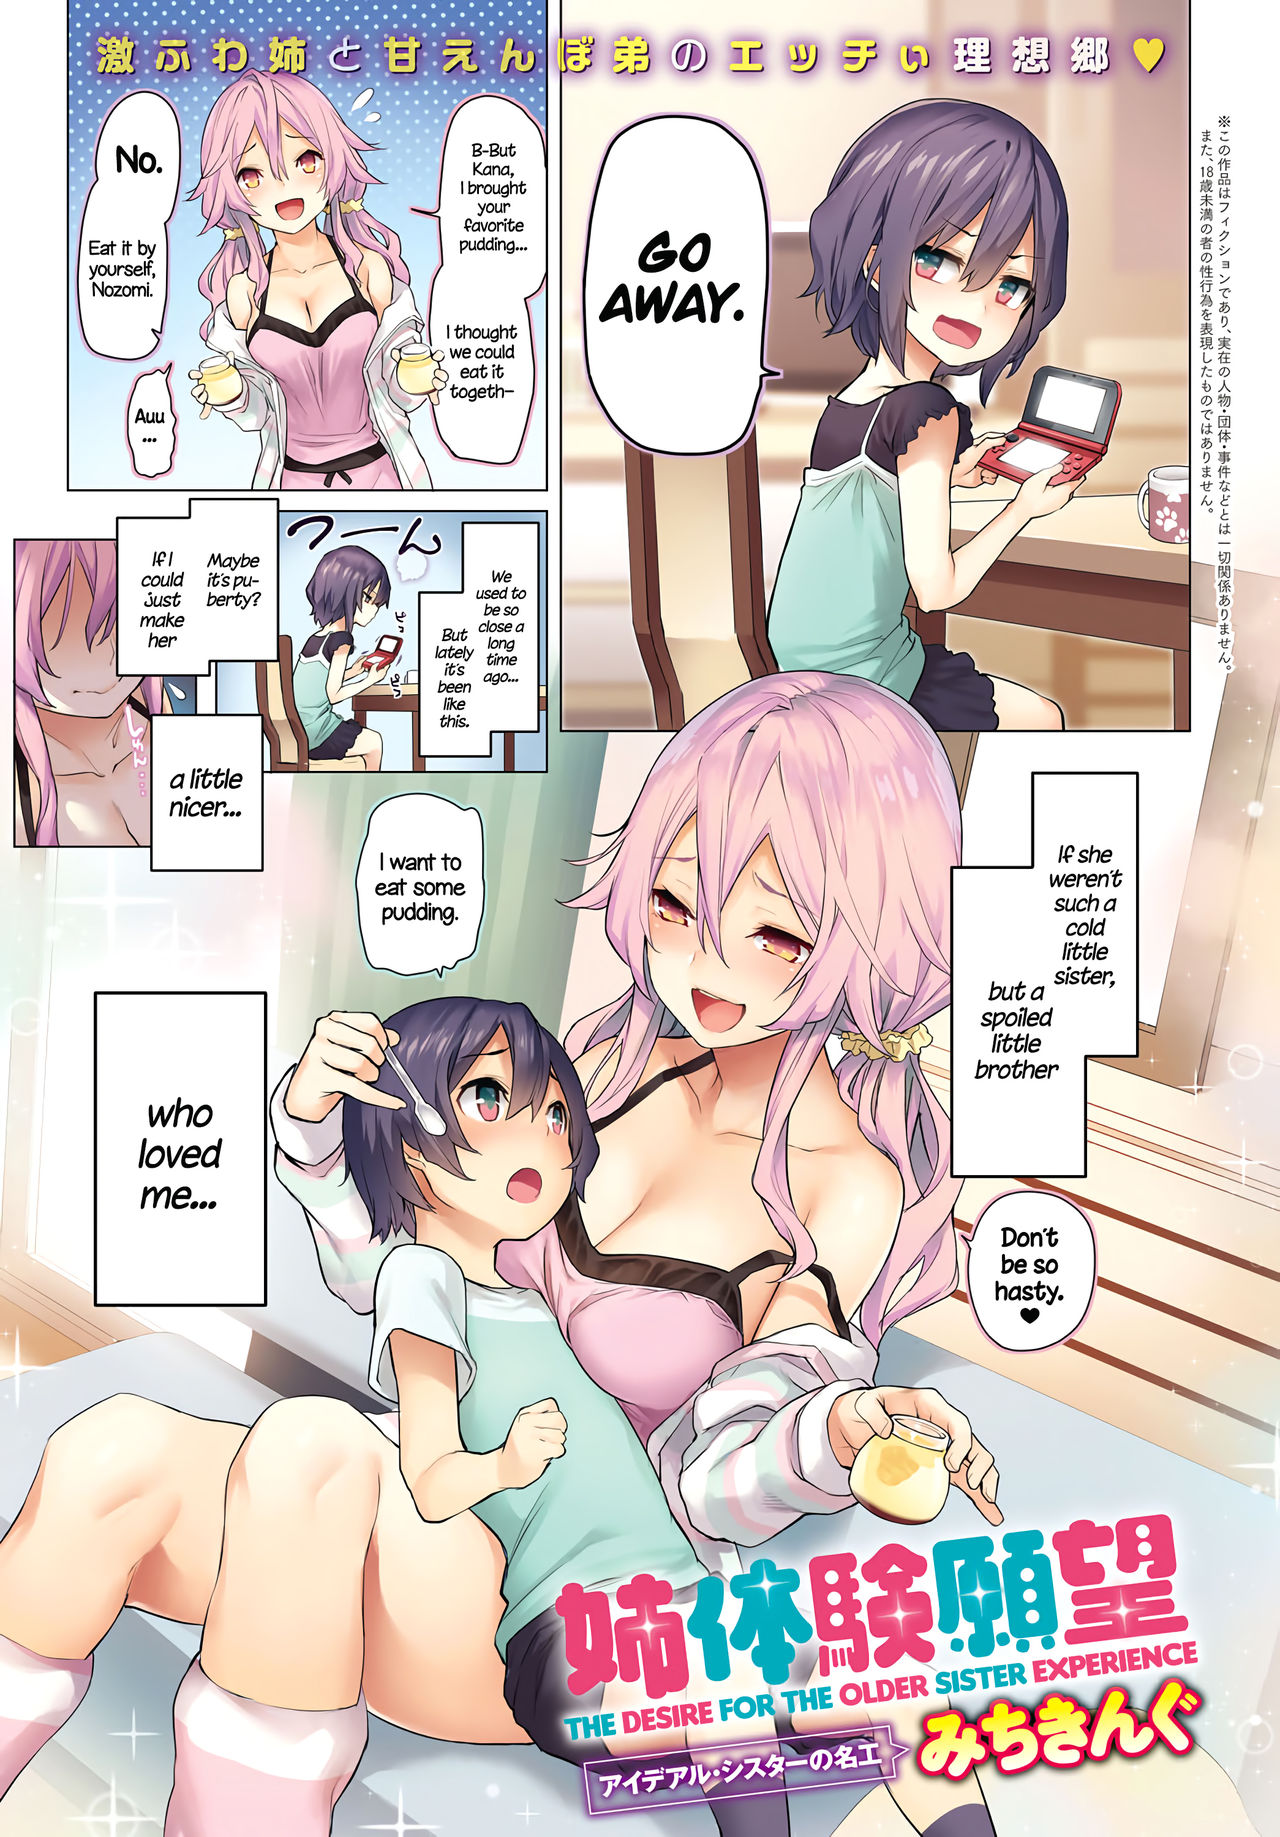 Sister brother hentai Older sister